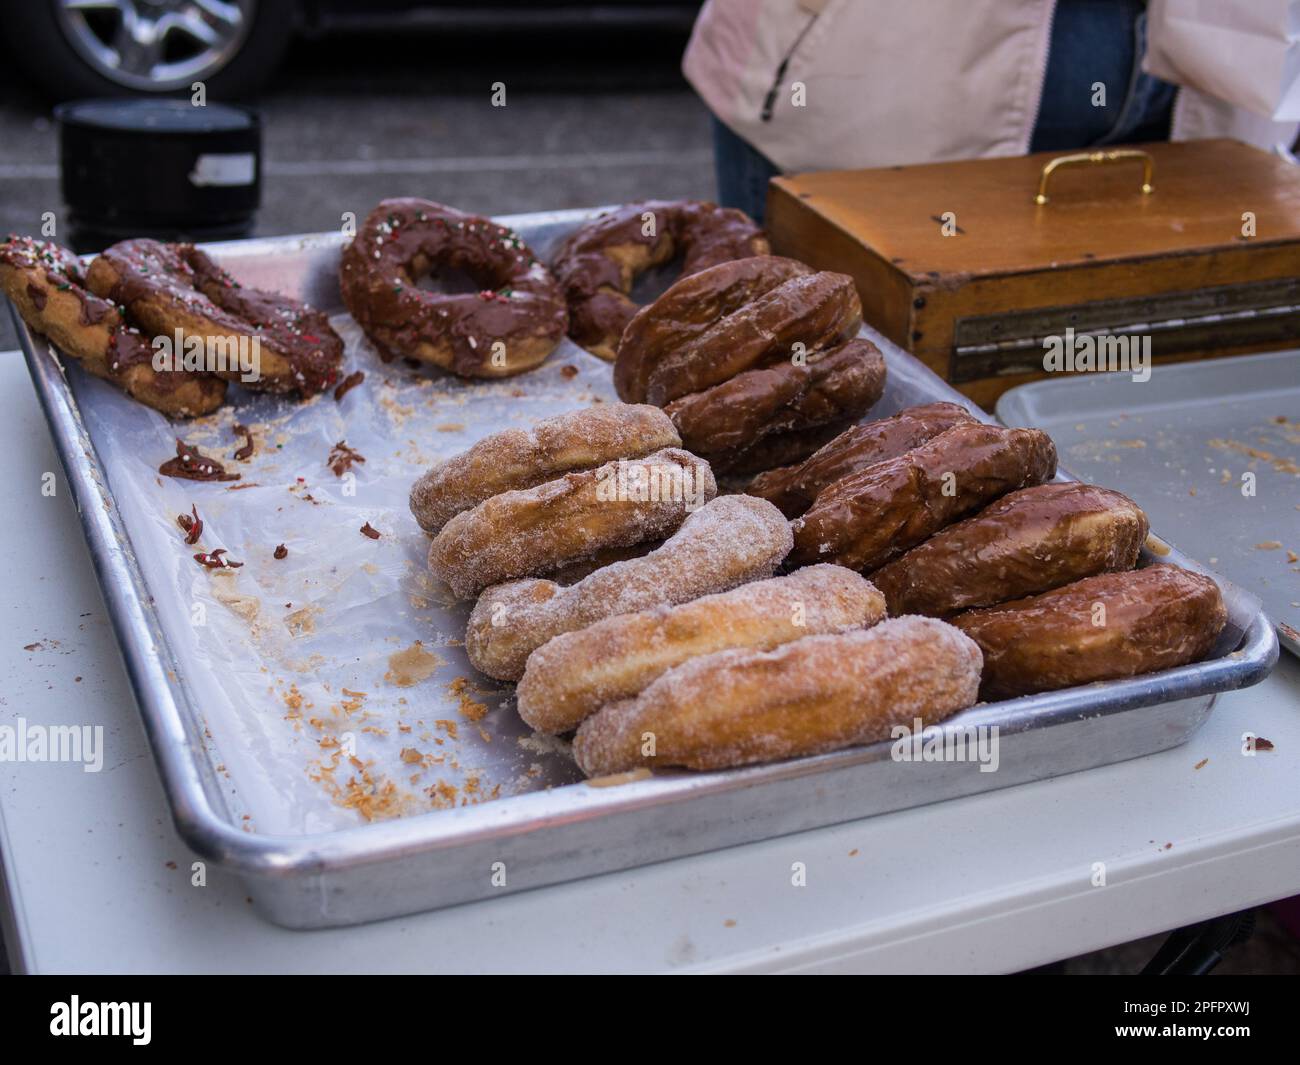 Donuts for sales at streetfood vendor. Stock Photo